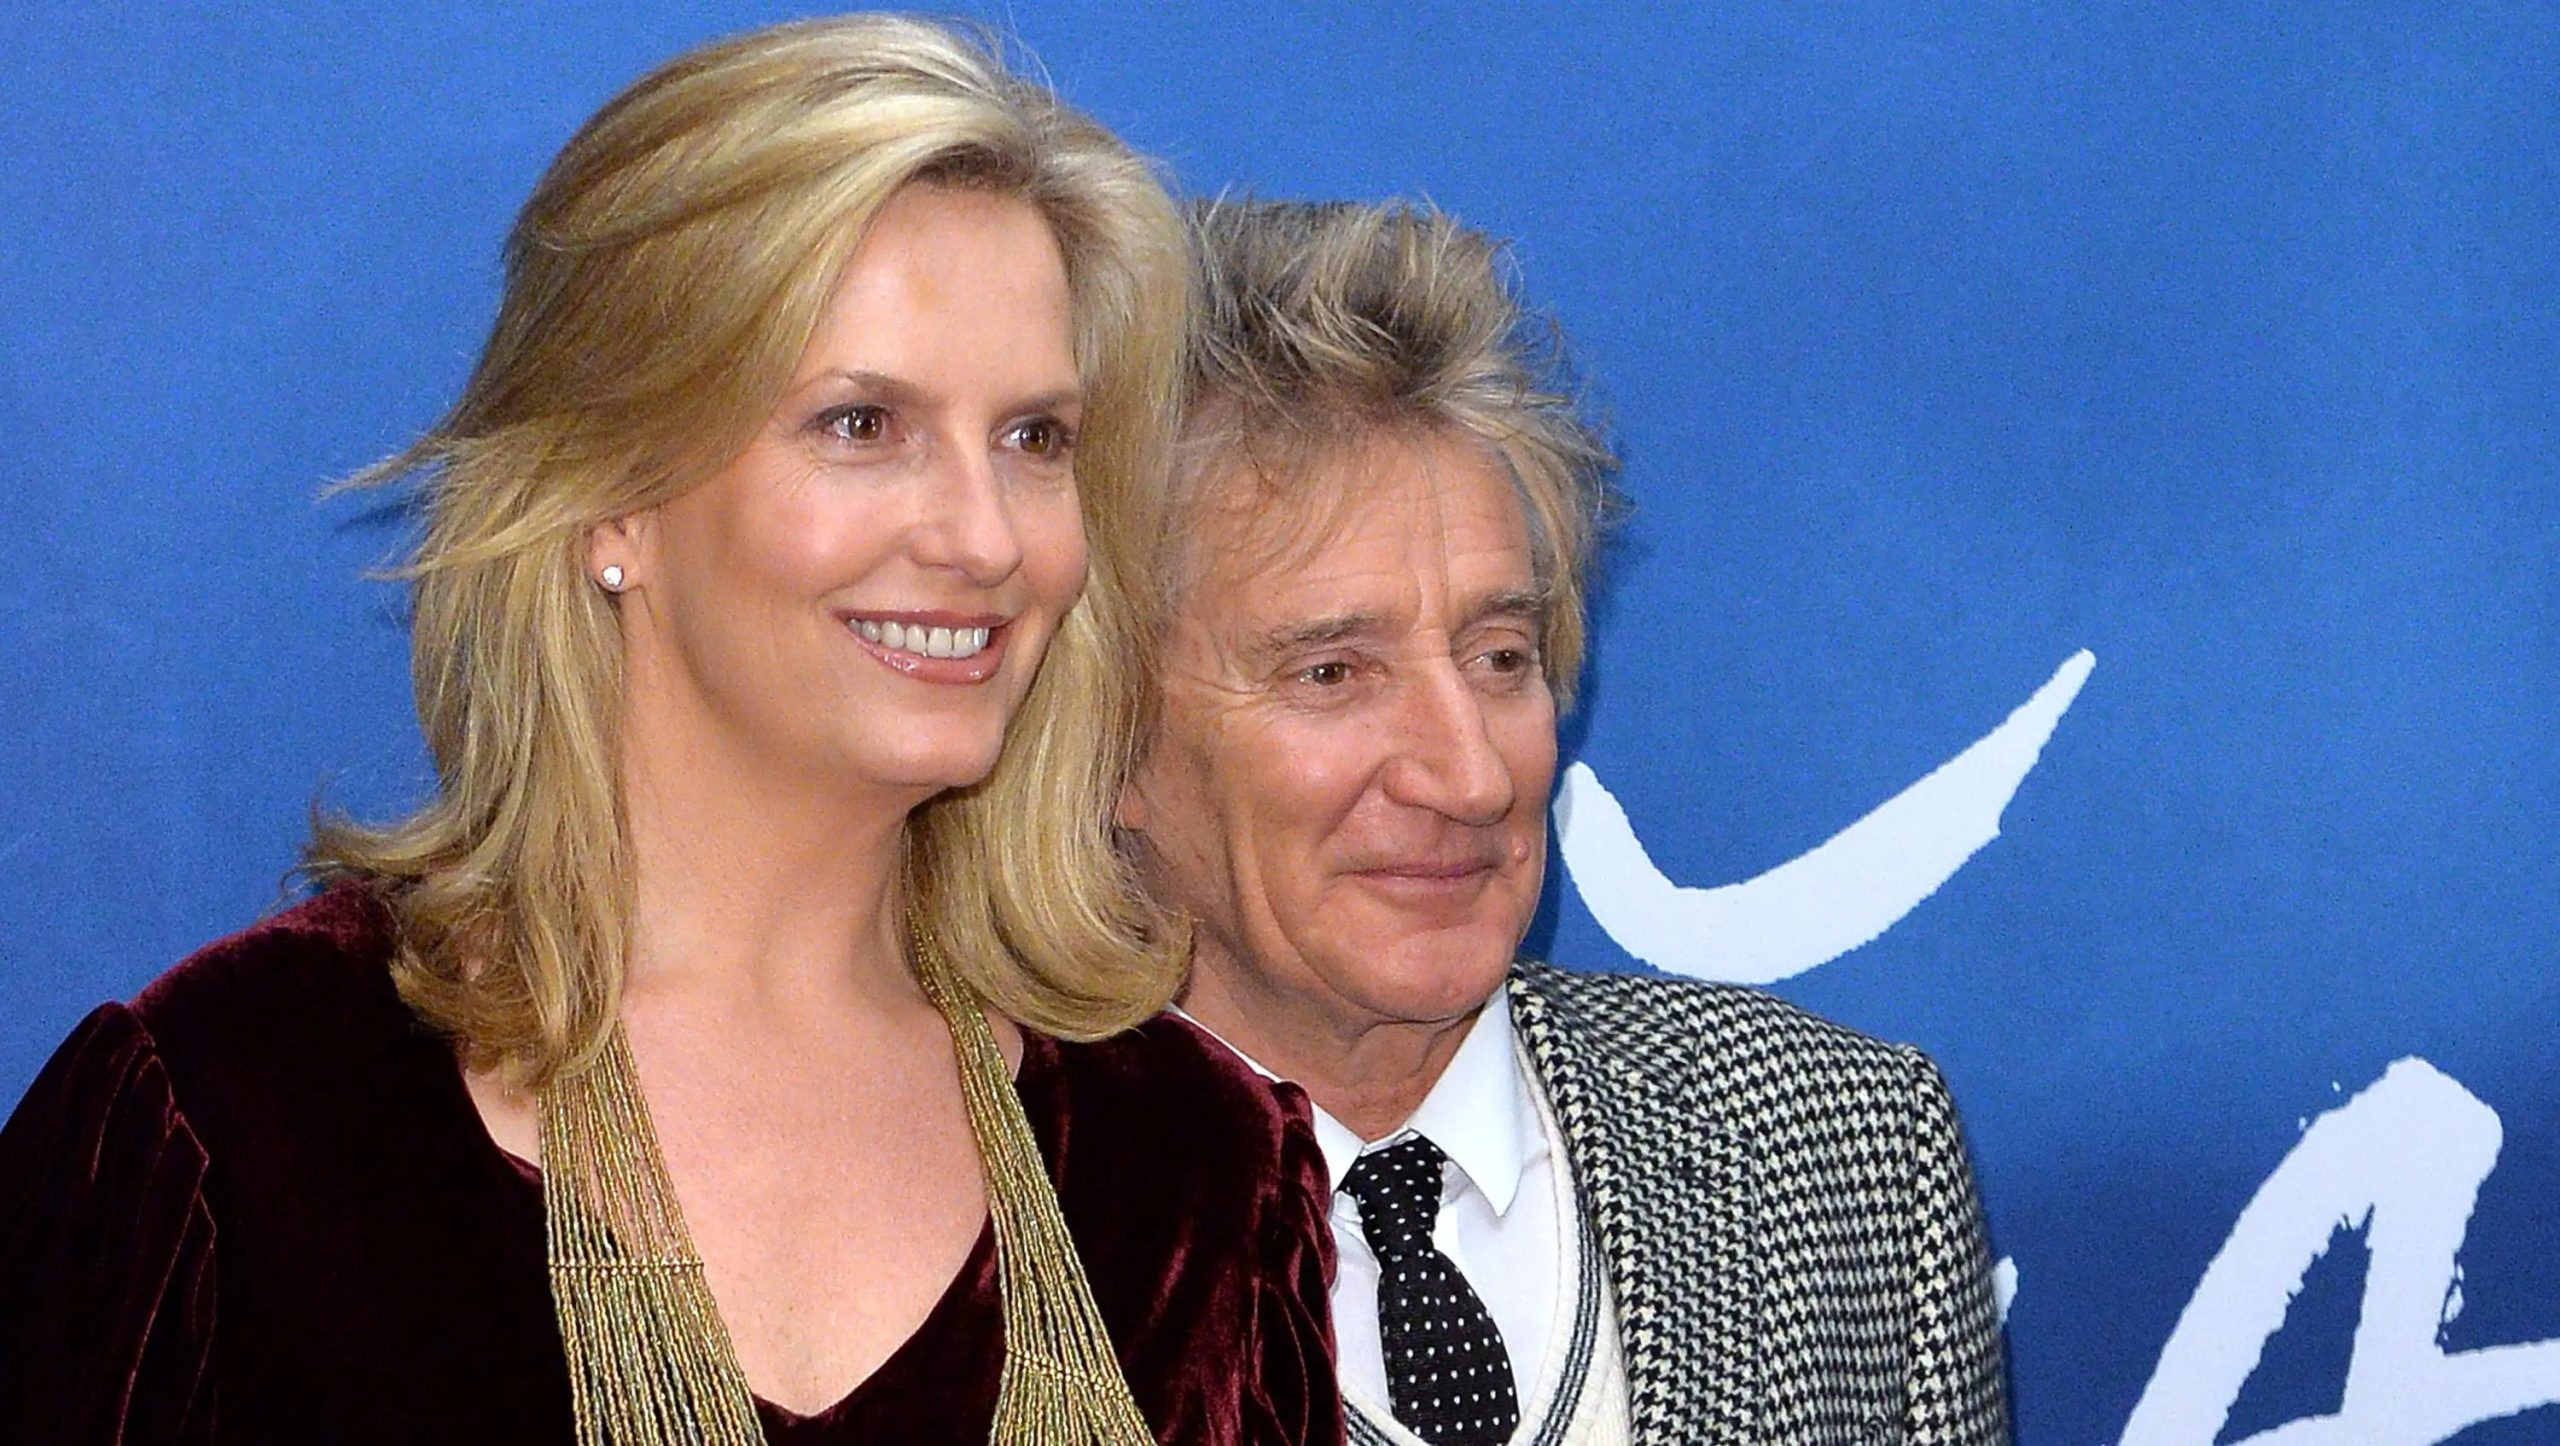 Rod Stewart Net Worth 2022: A Real Time Update on Richer Life!